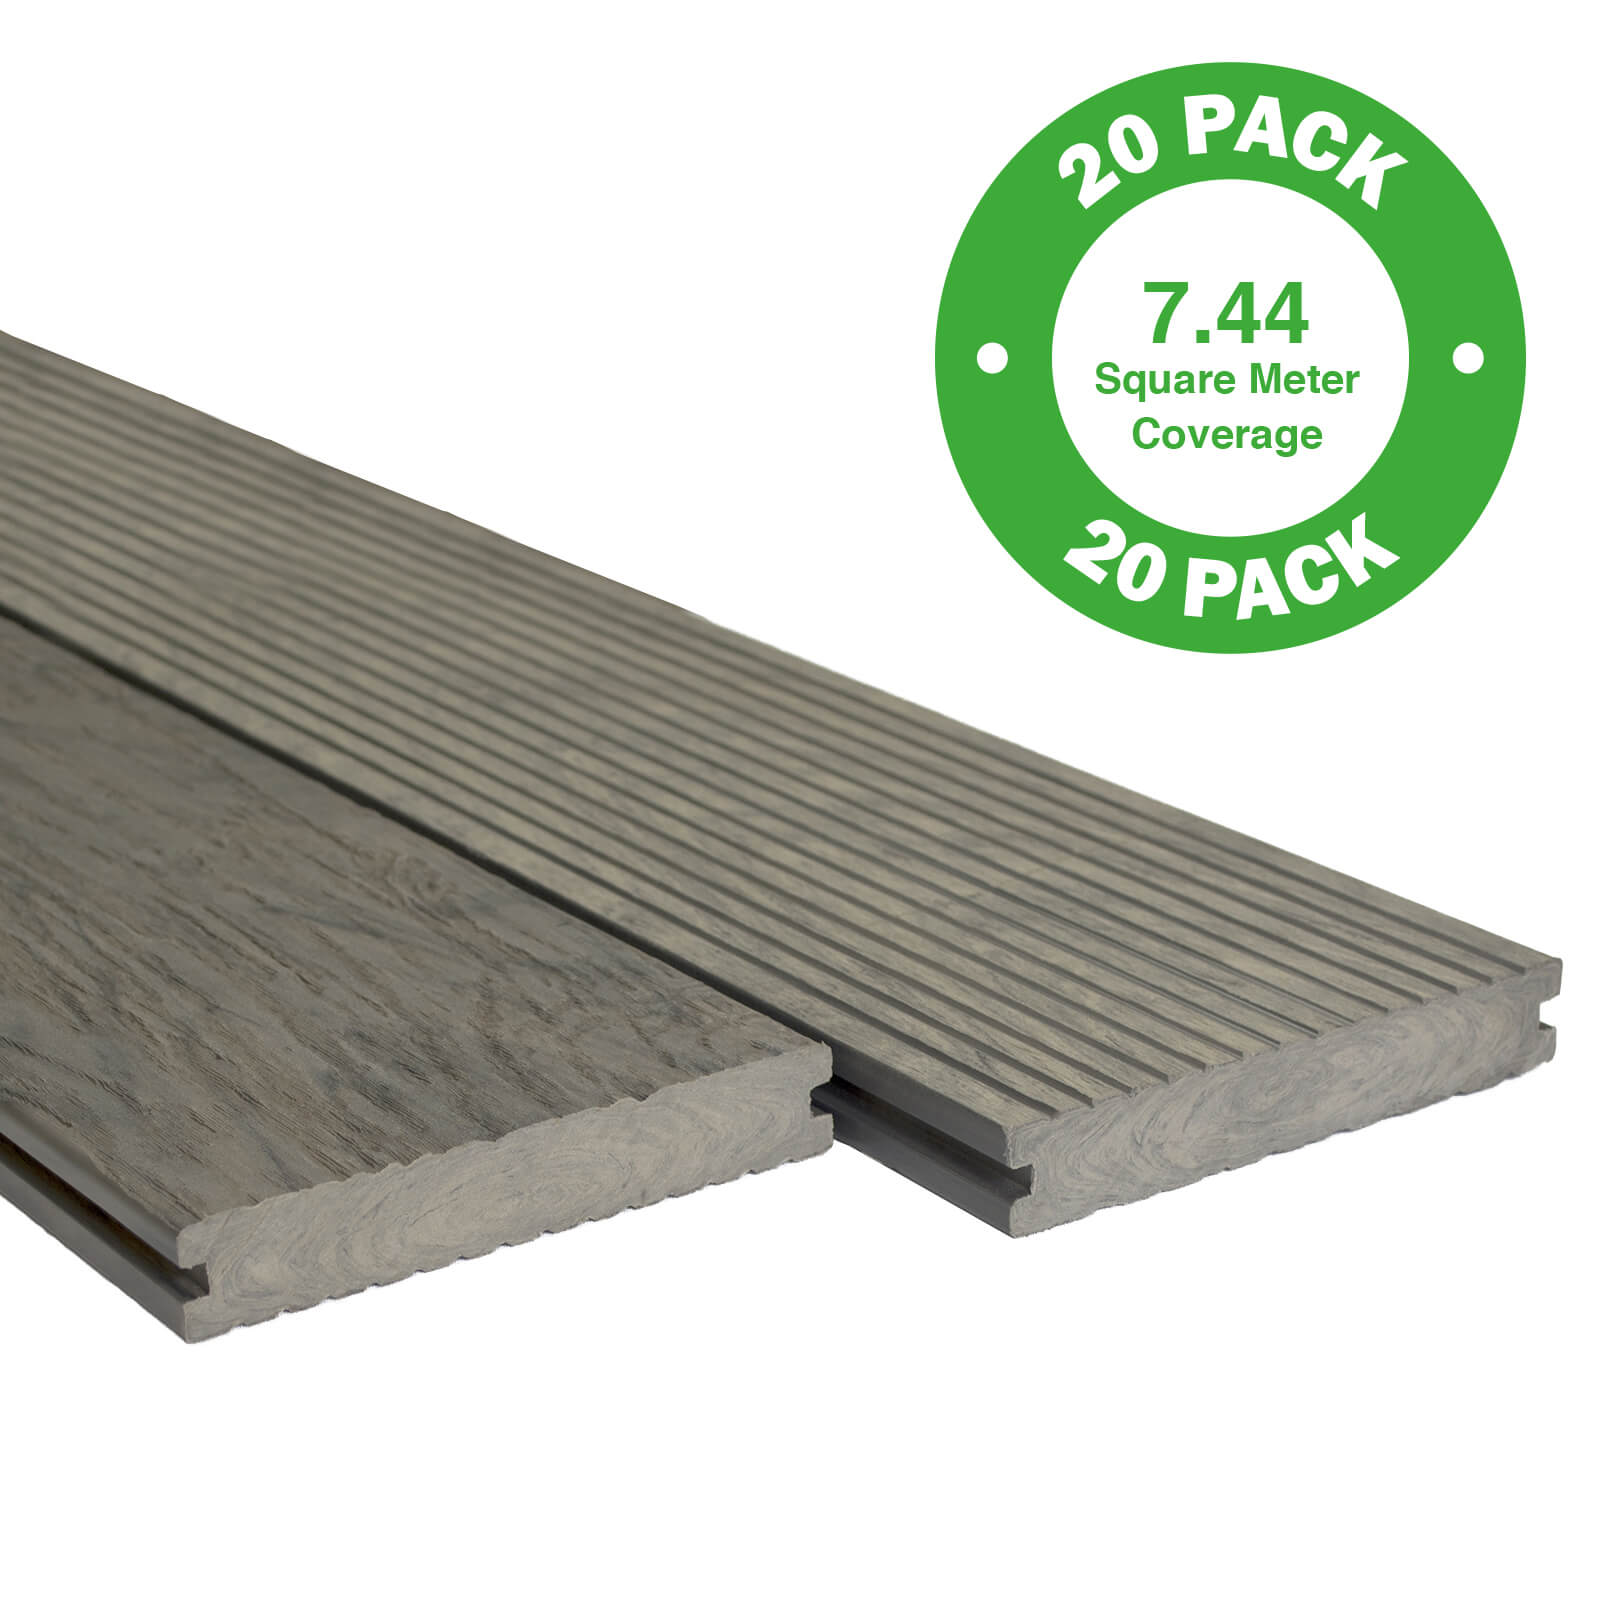 Photo of Heritage Composite Decking 20 Pack Driftwood - 7.44 M2